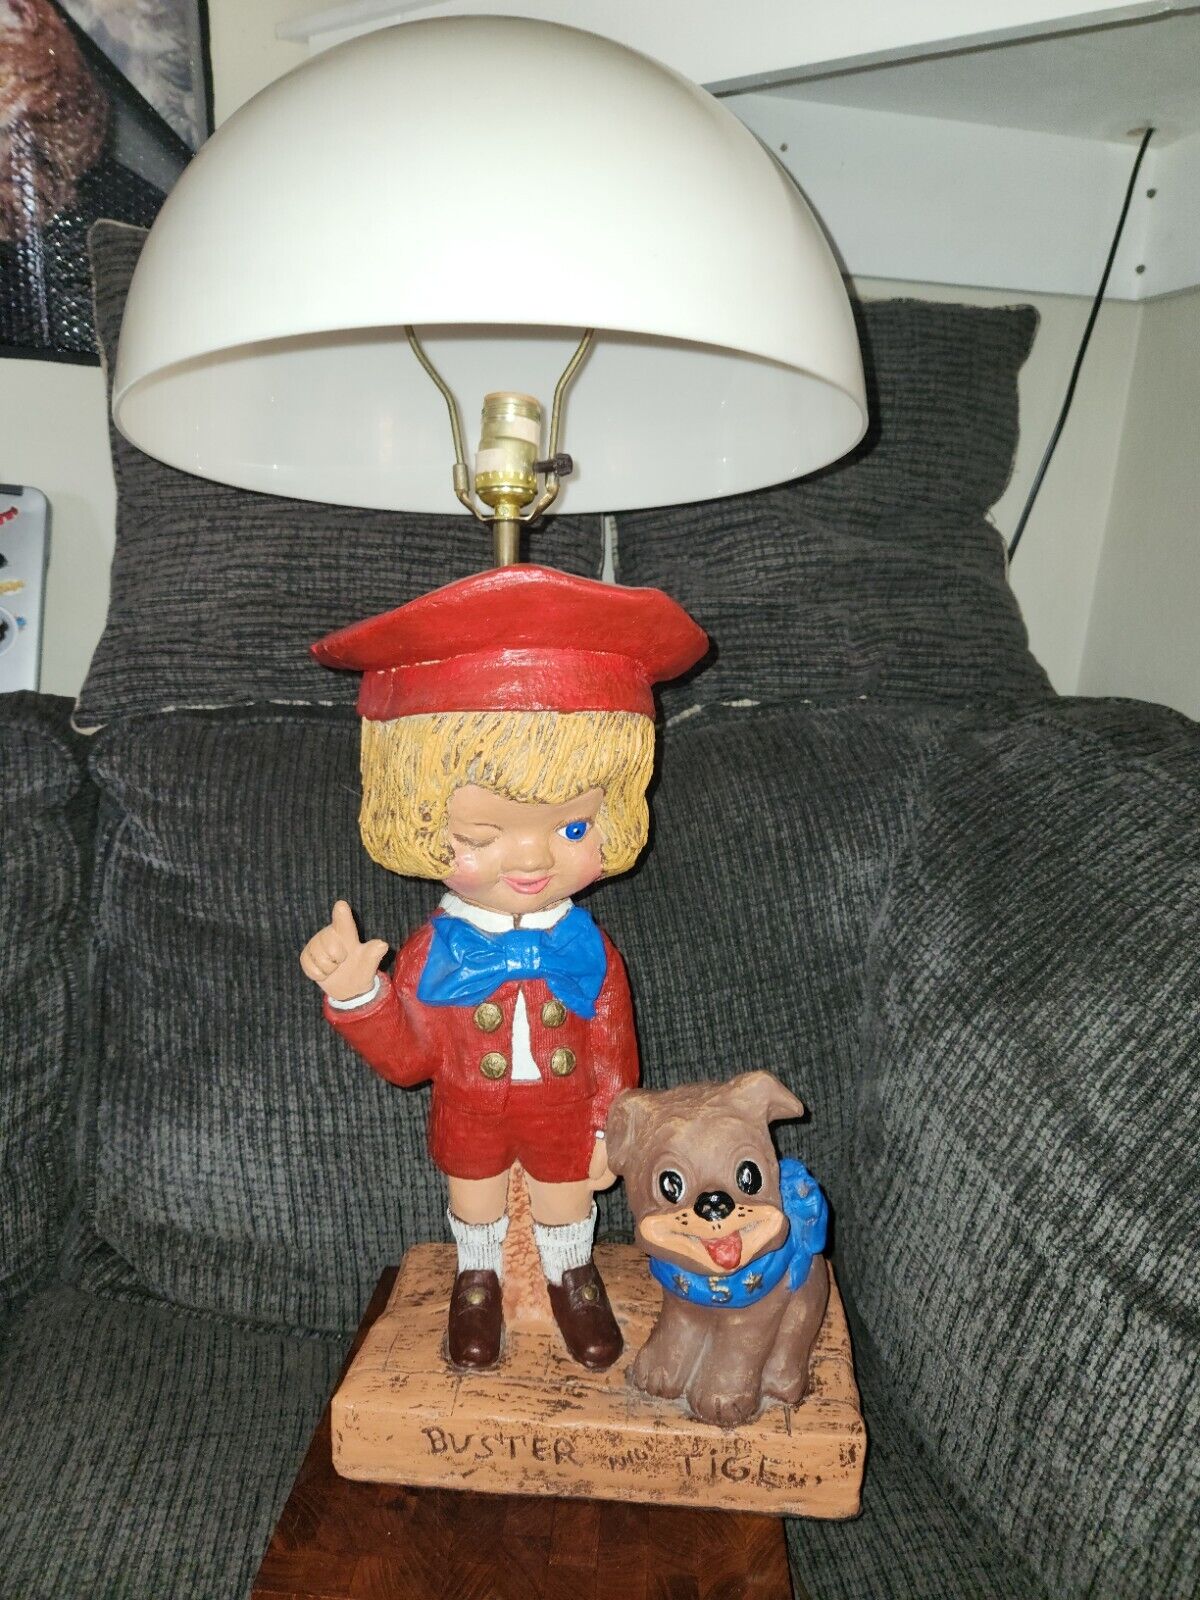 Vintage Buster Brown And Tige Table Lamp